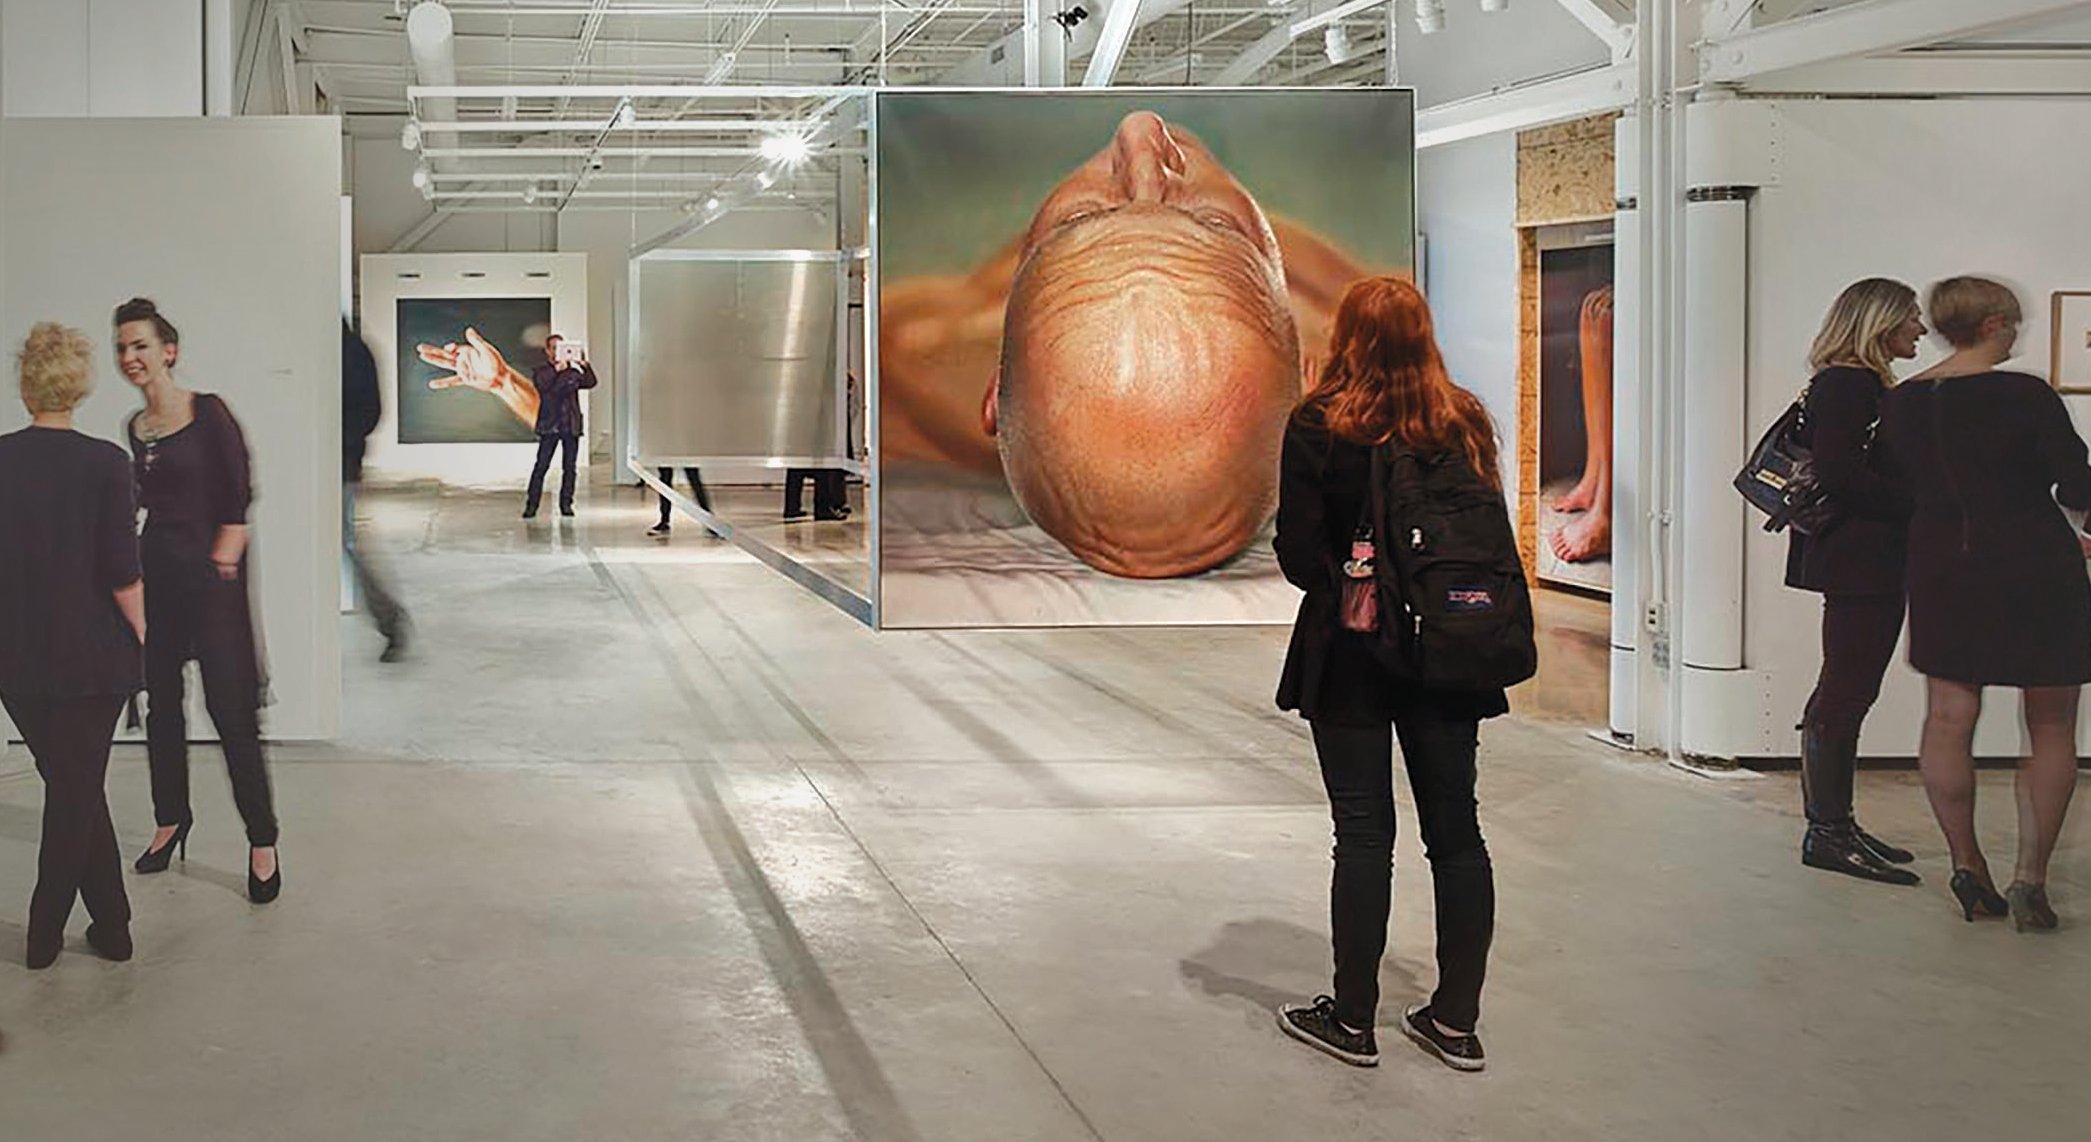 a woman examines a painting in an industrial museum setting